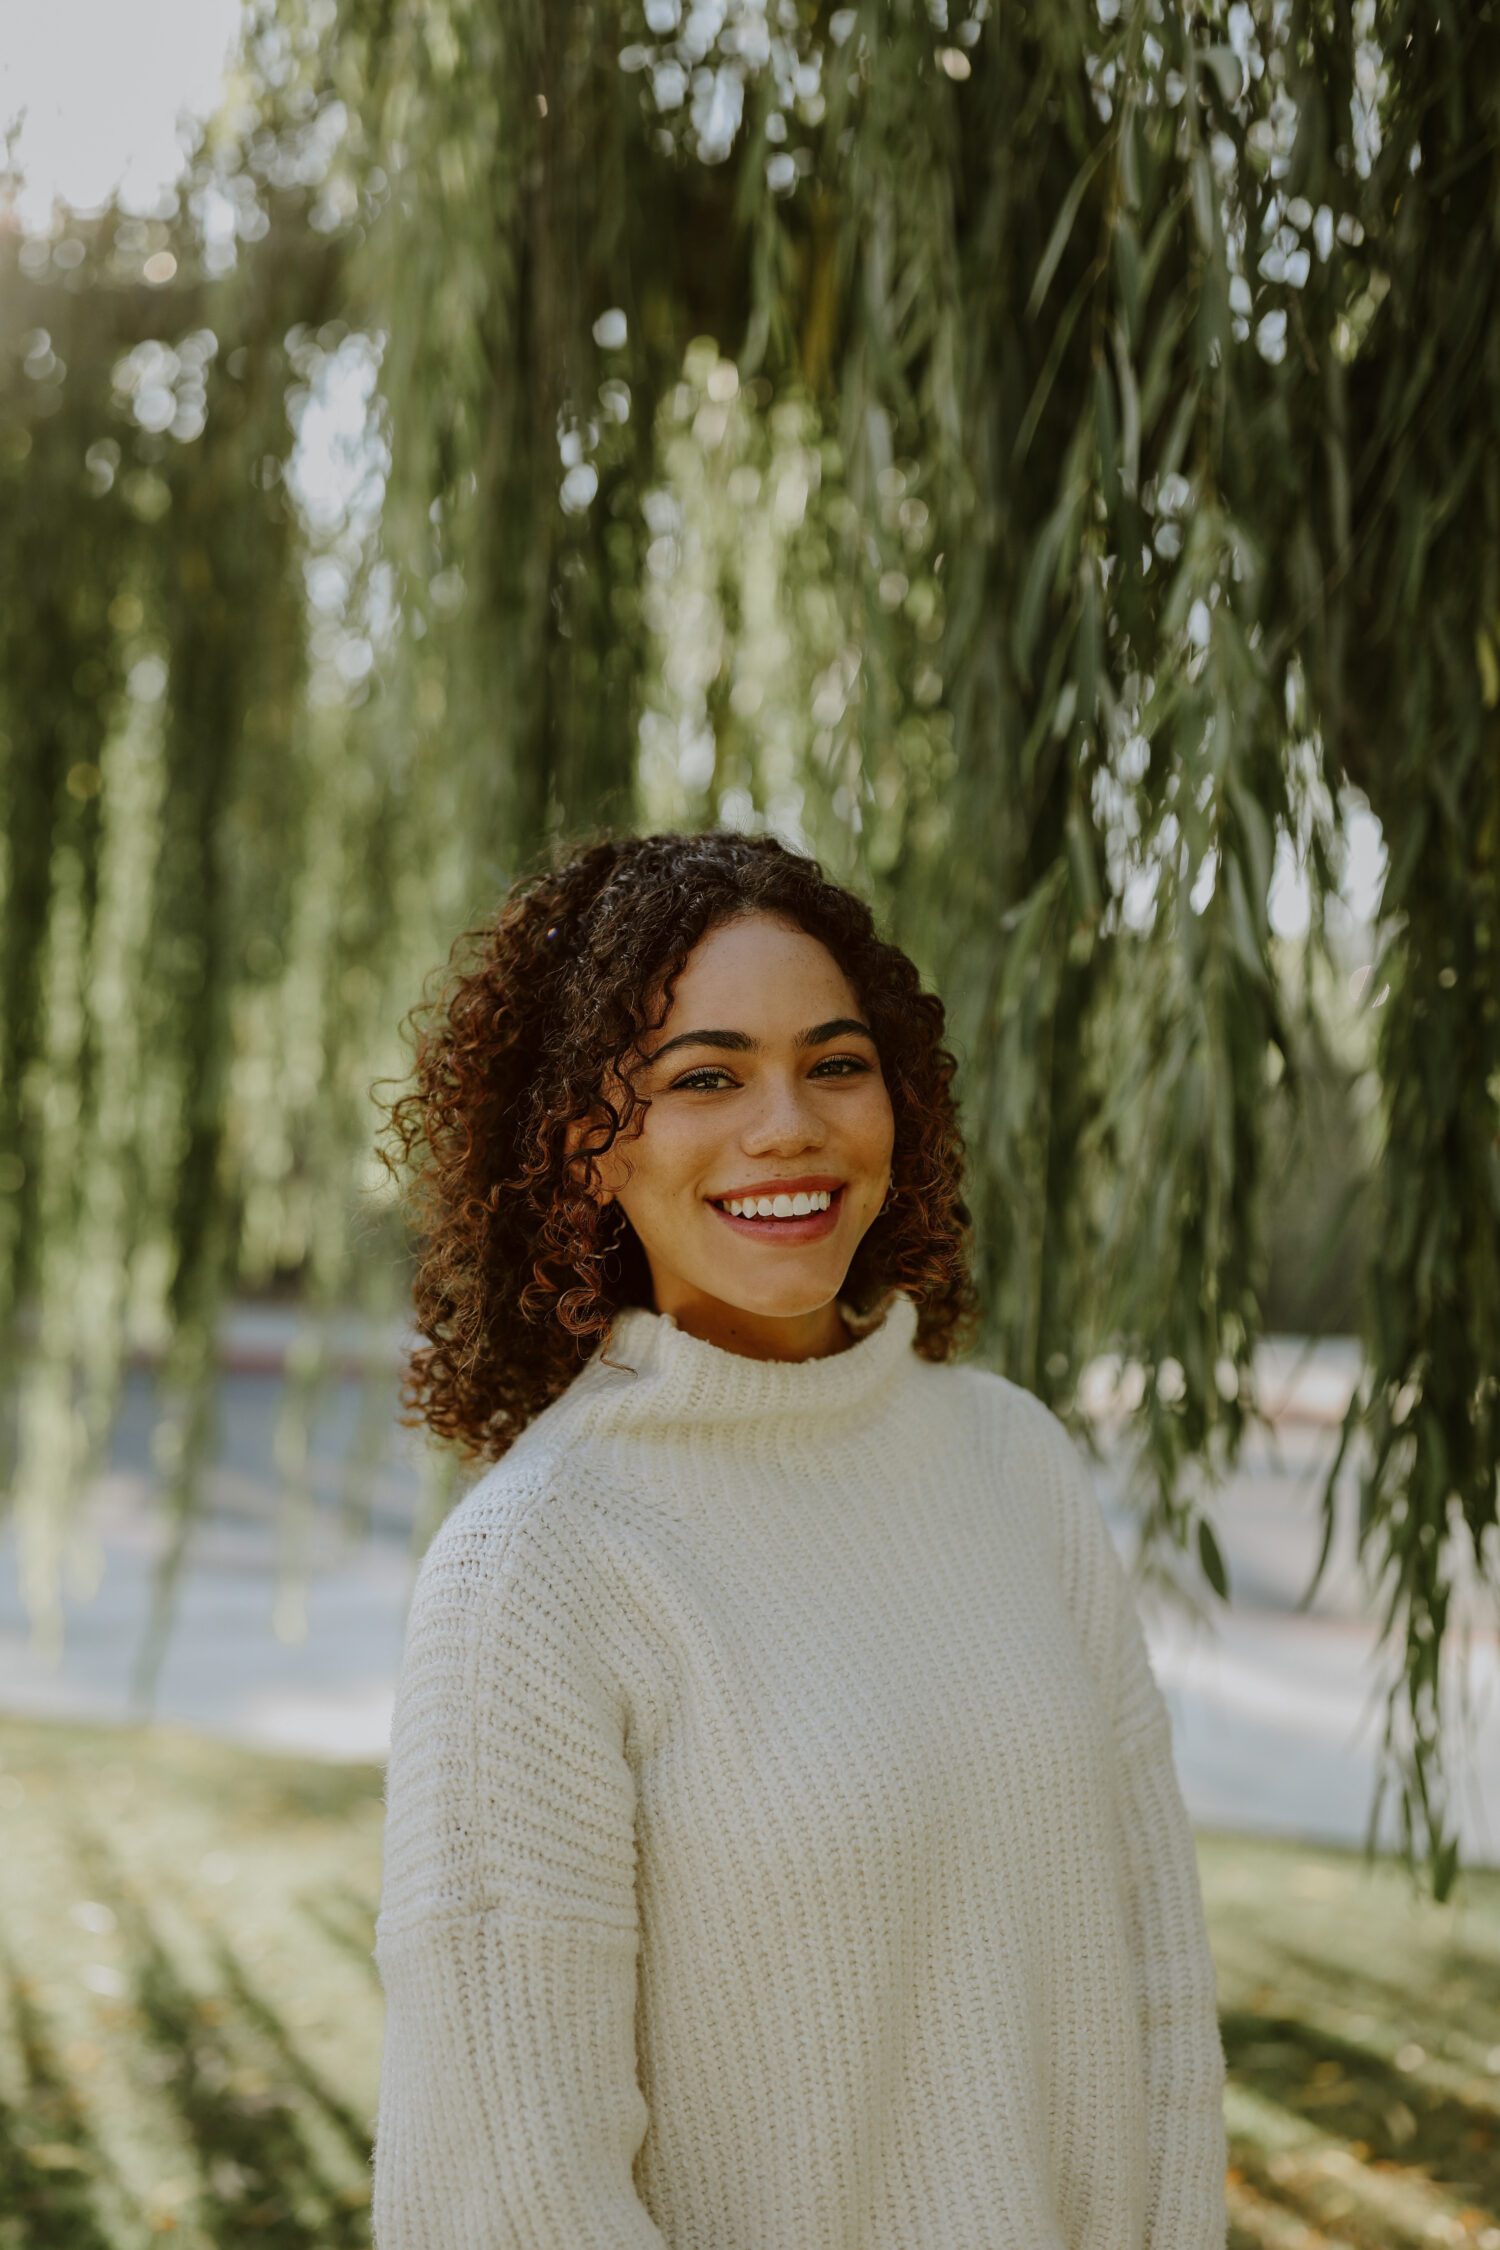 Law student Gabby Olk smiles in a white sweater standing in front of a willow tree